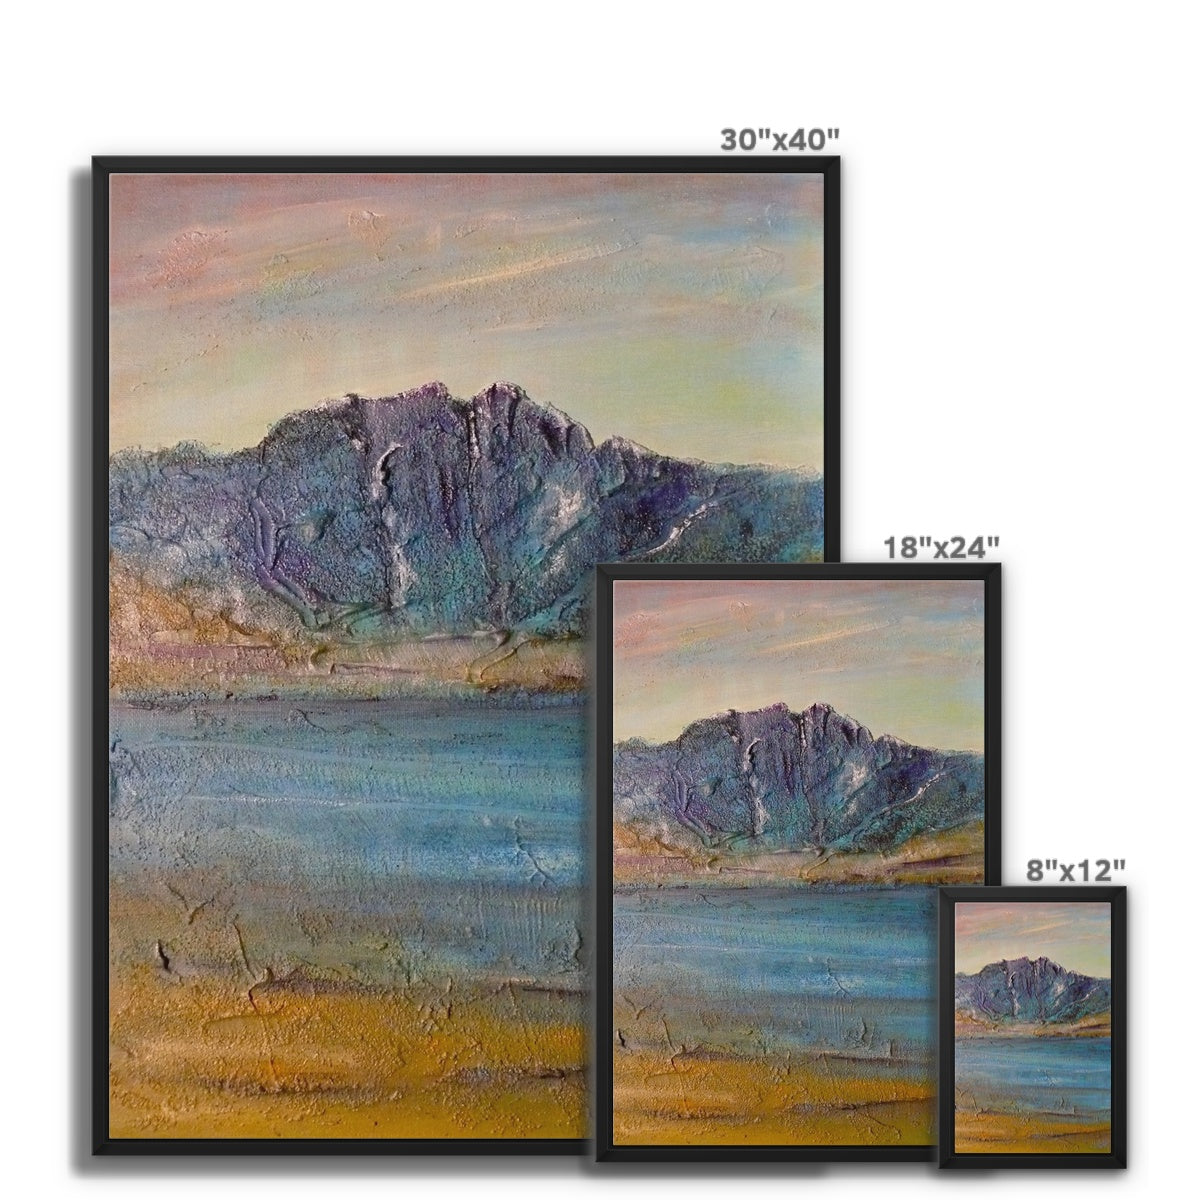 Torridon Painting | Framed Canvas From Scotland-Floating Framed Canvas Prints-Scottish Lochs & Mountains Art Gallery-Paintings, Prints, Homeware, Art Gifts From Scotland By Scottish Artist Kevin Hunter